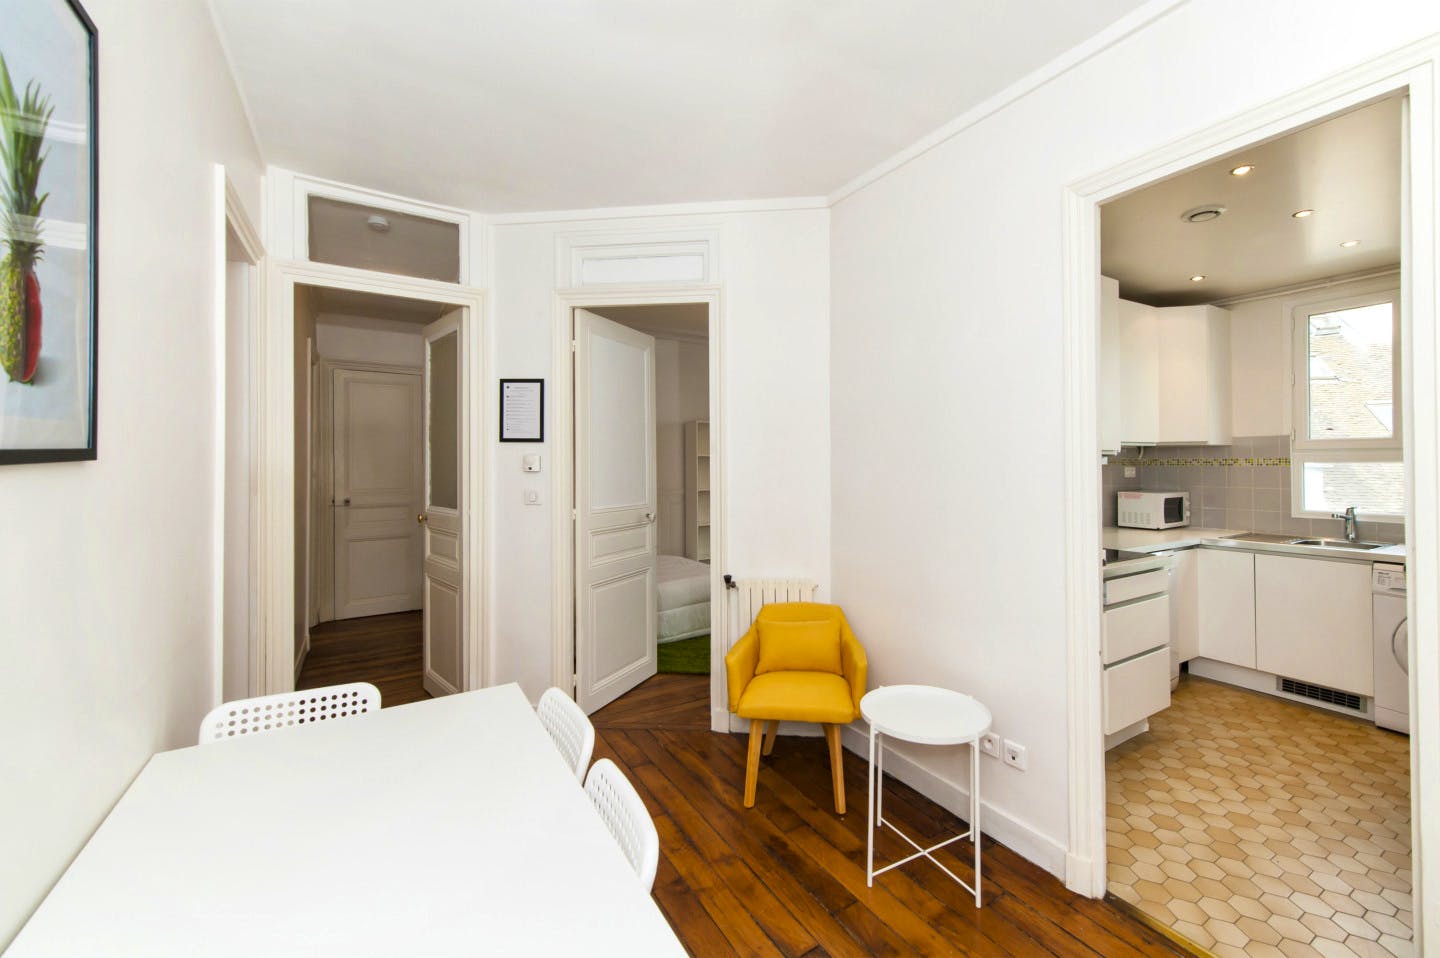 An exquisite apartment near Gare du Nord Train Station